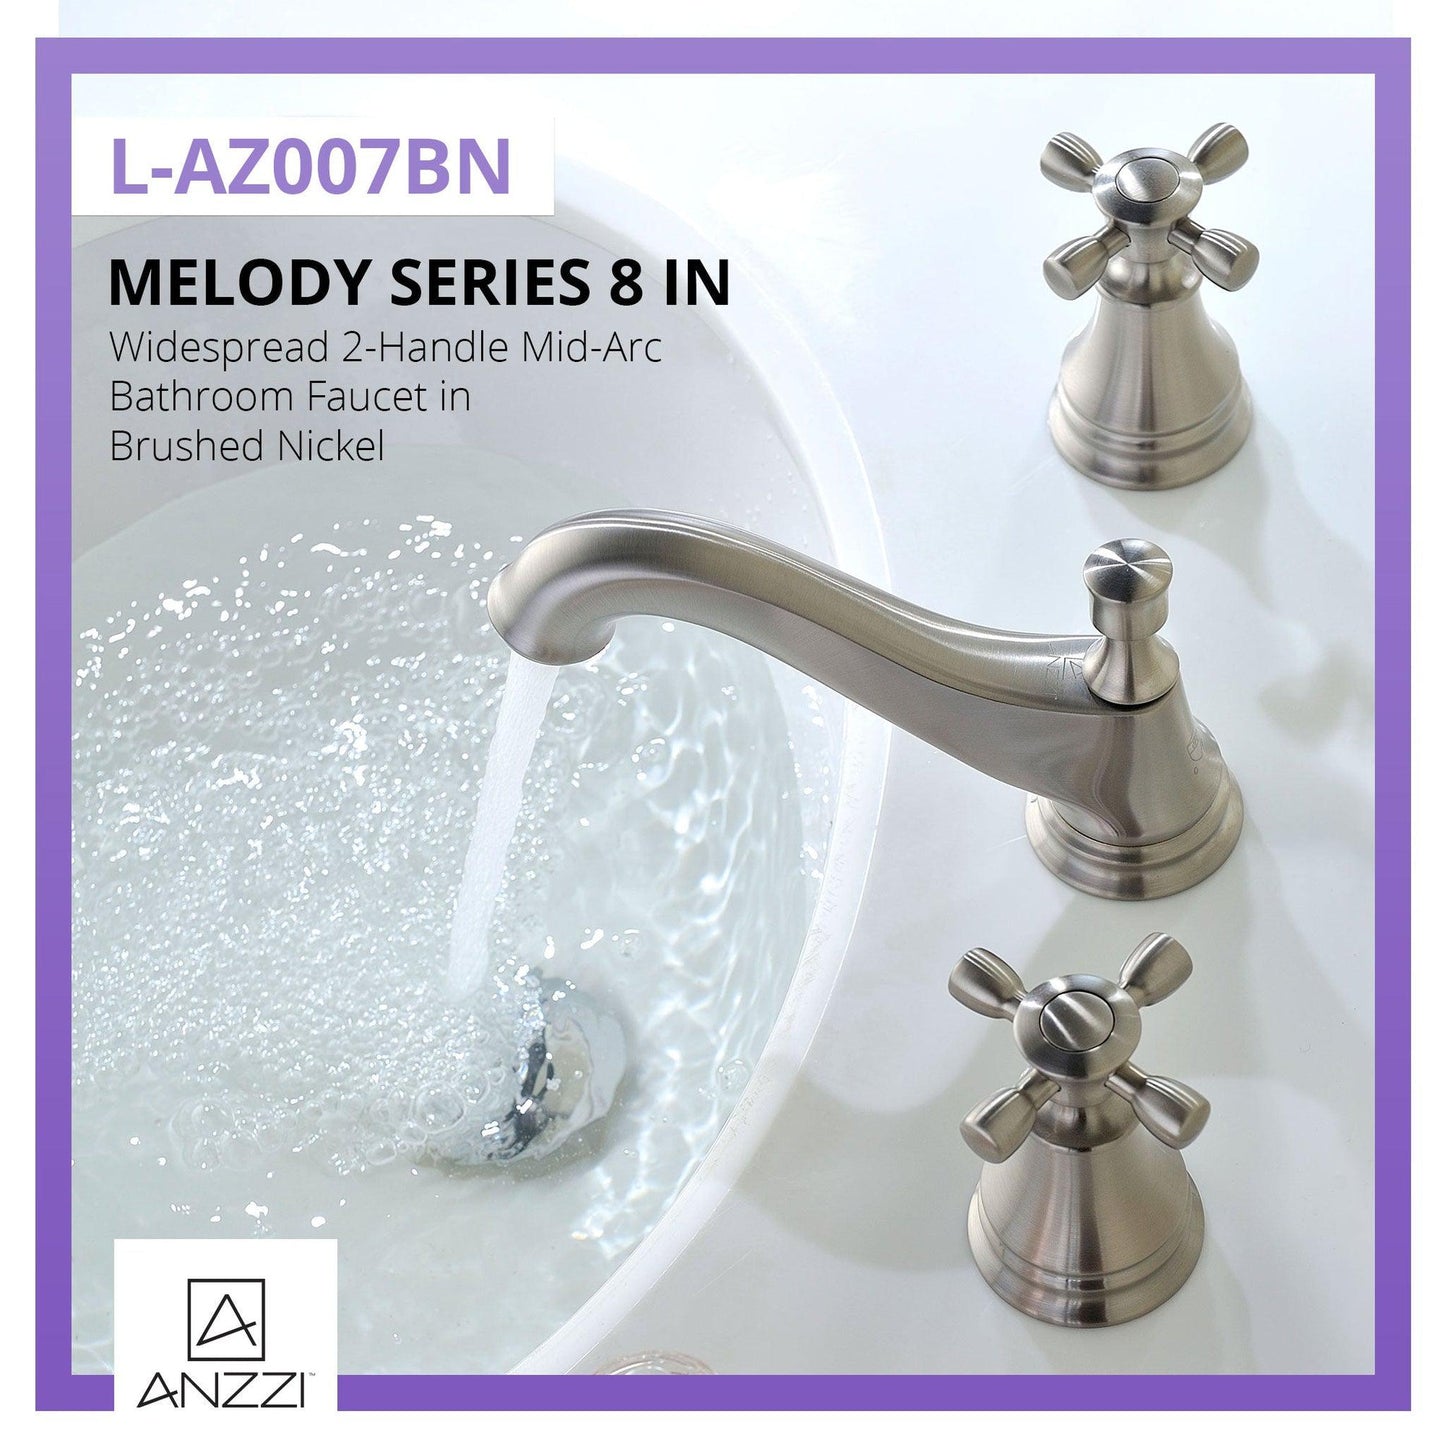 ANZZI Melody Series 3" Widespread Brushed Nickel Mid-Arc Bathroom Sink Faucet